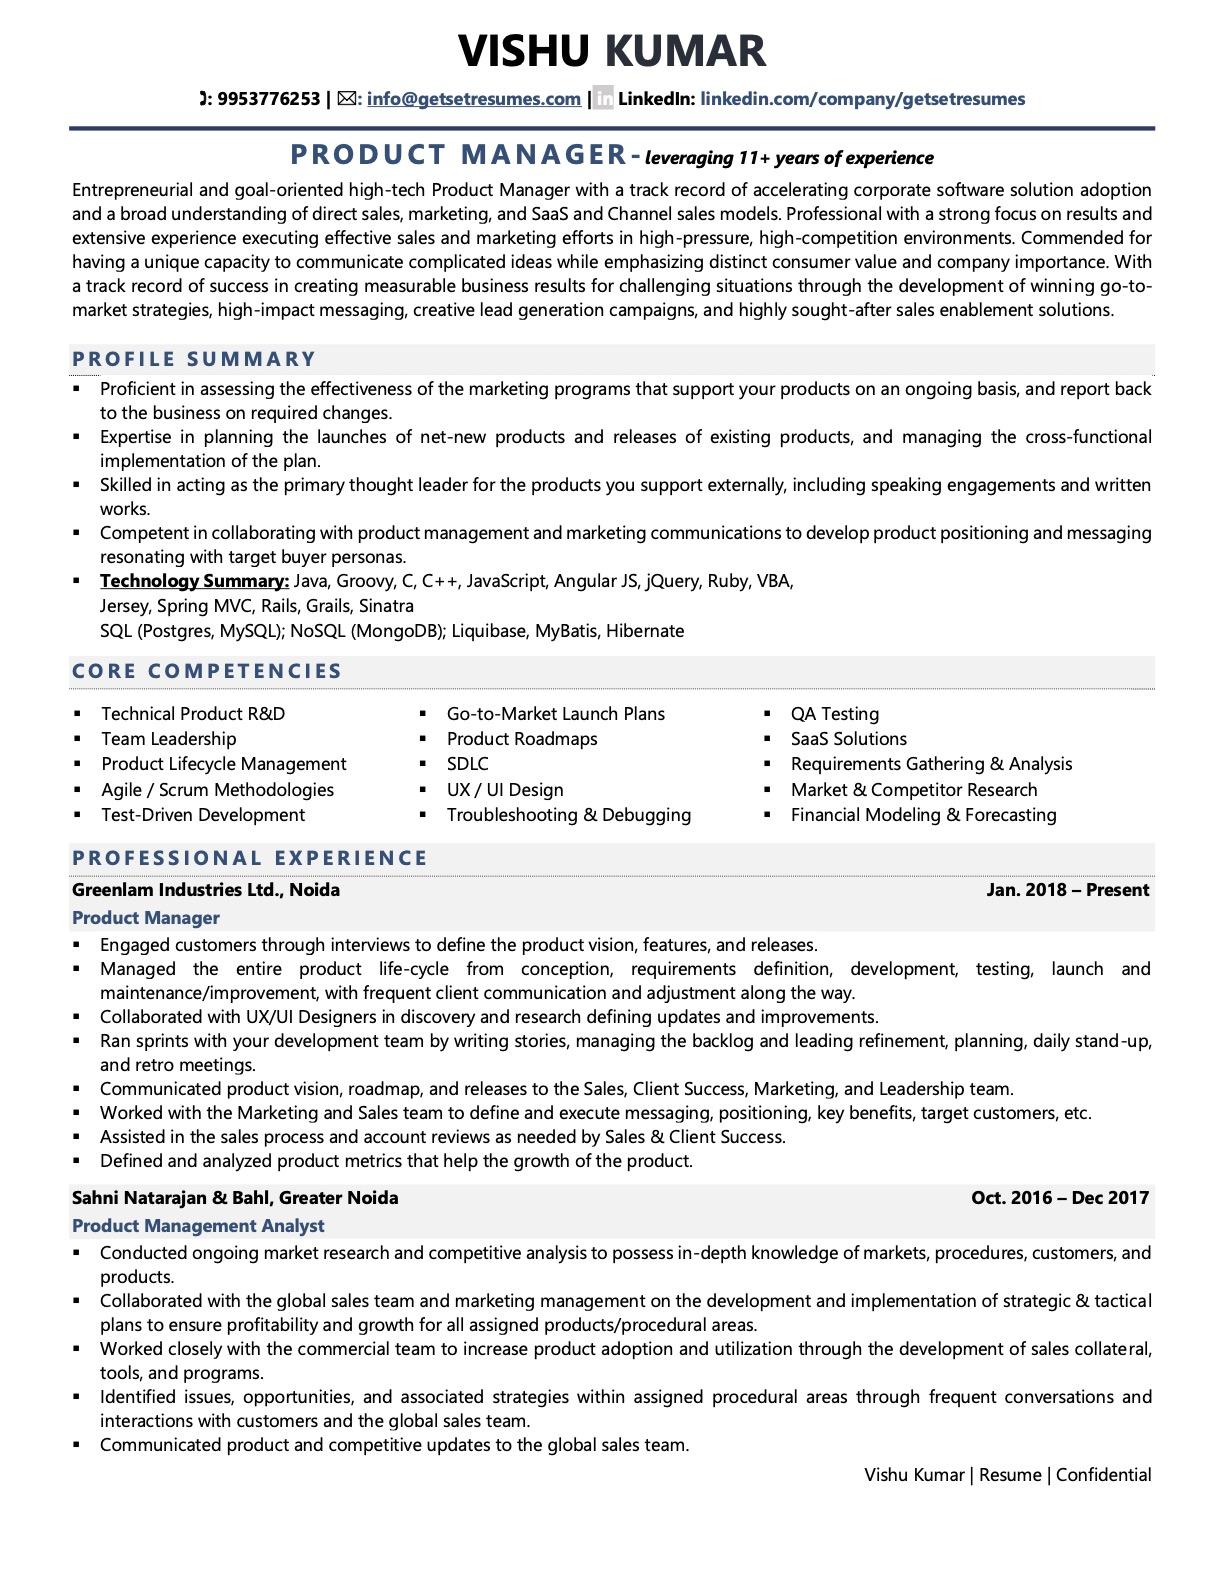 Product Manager - Resume Example & Template